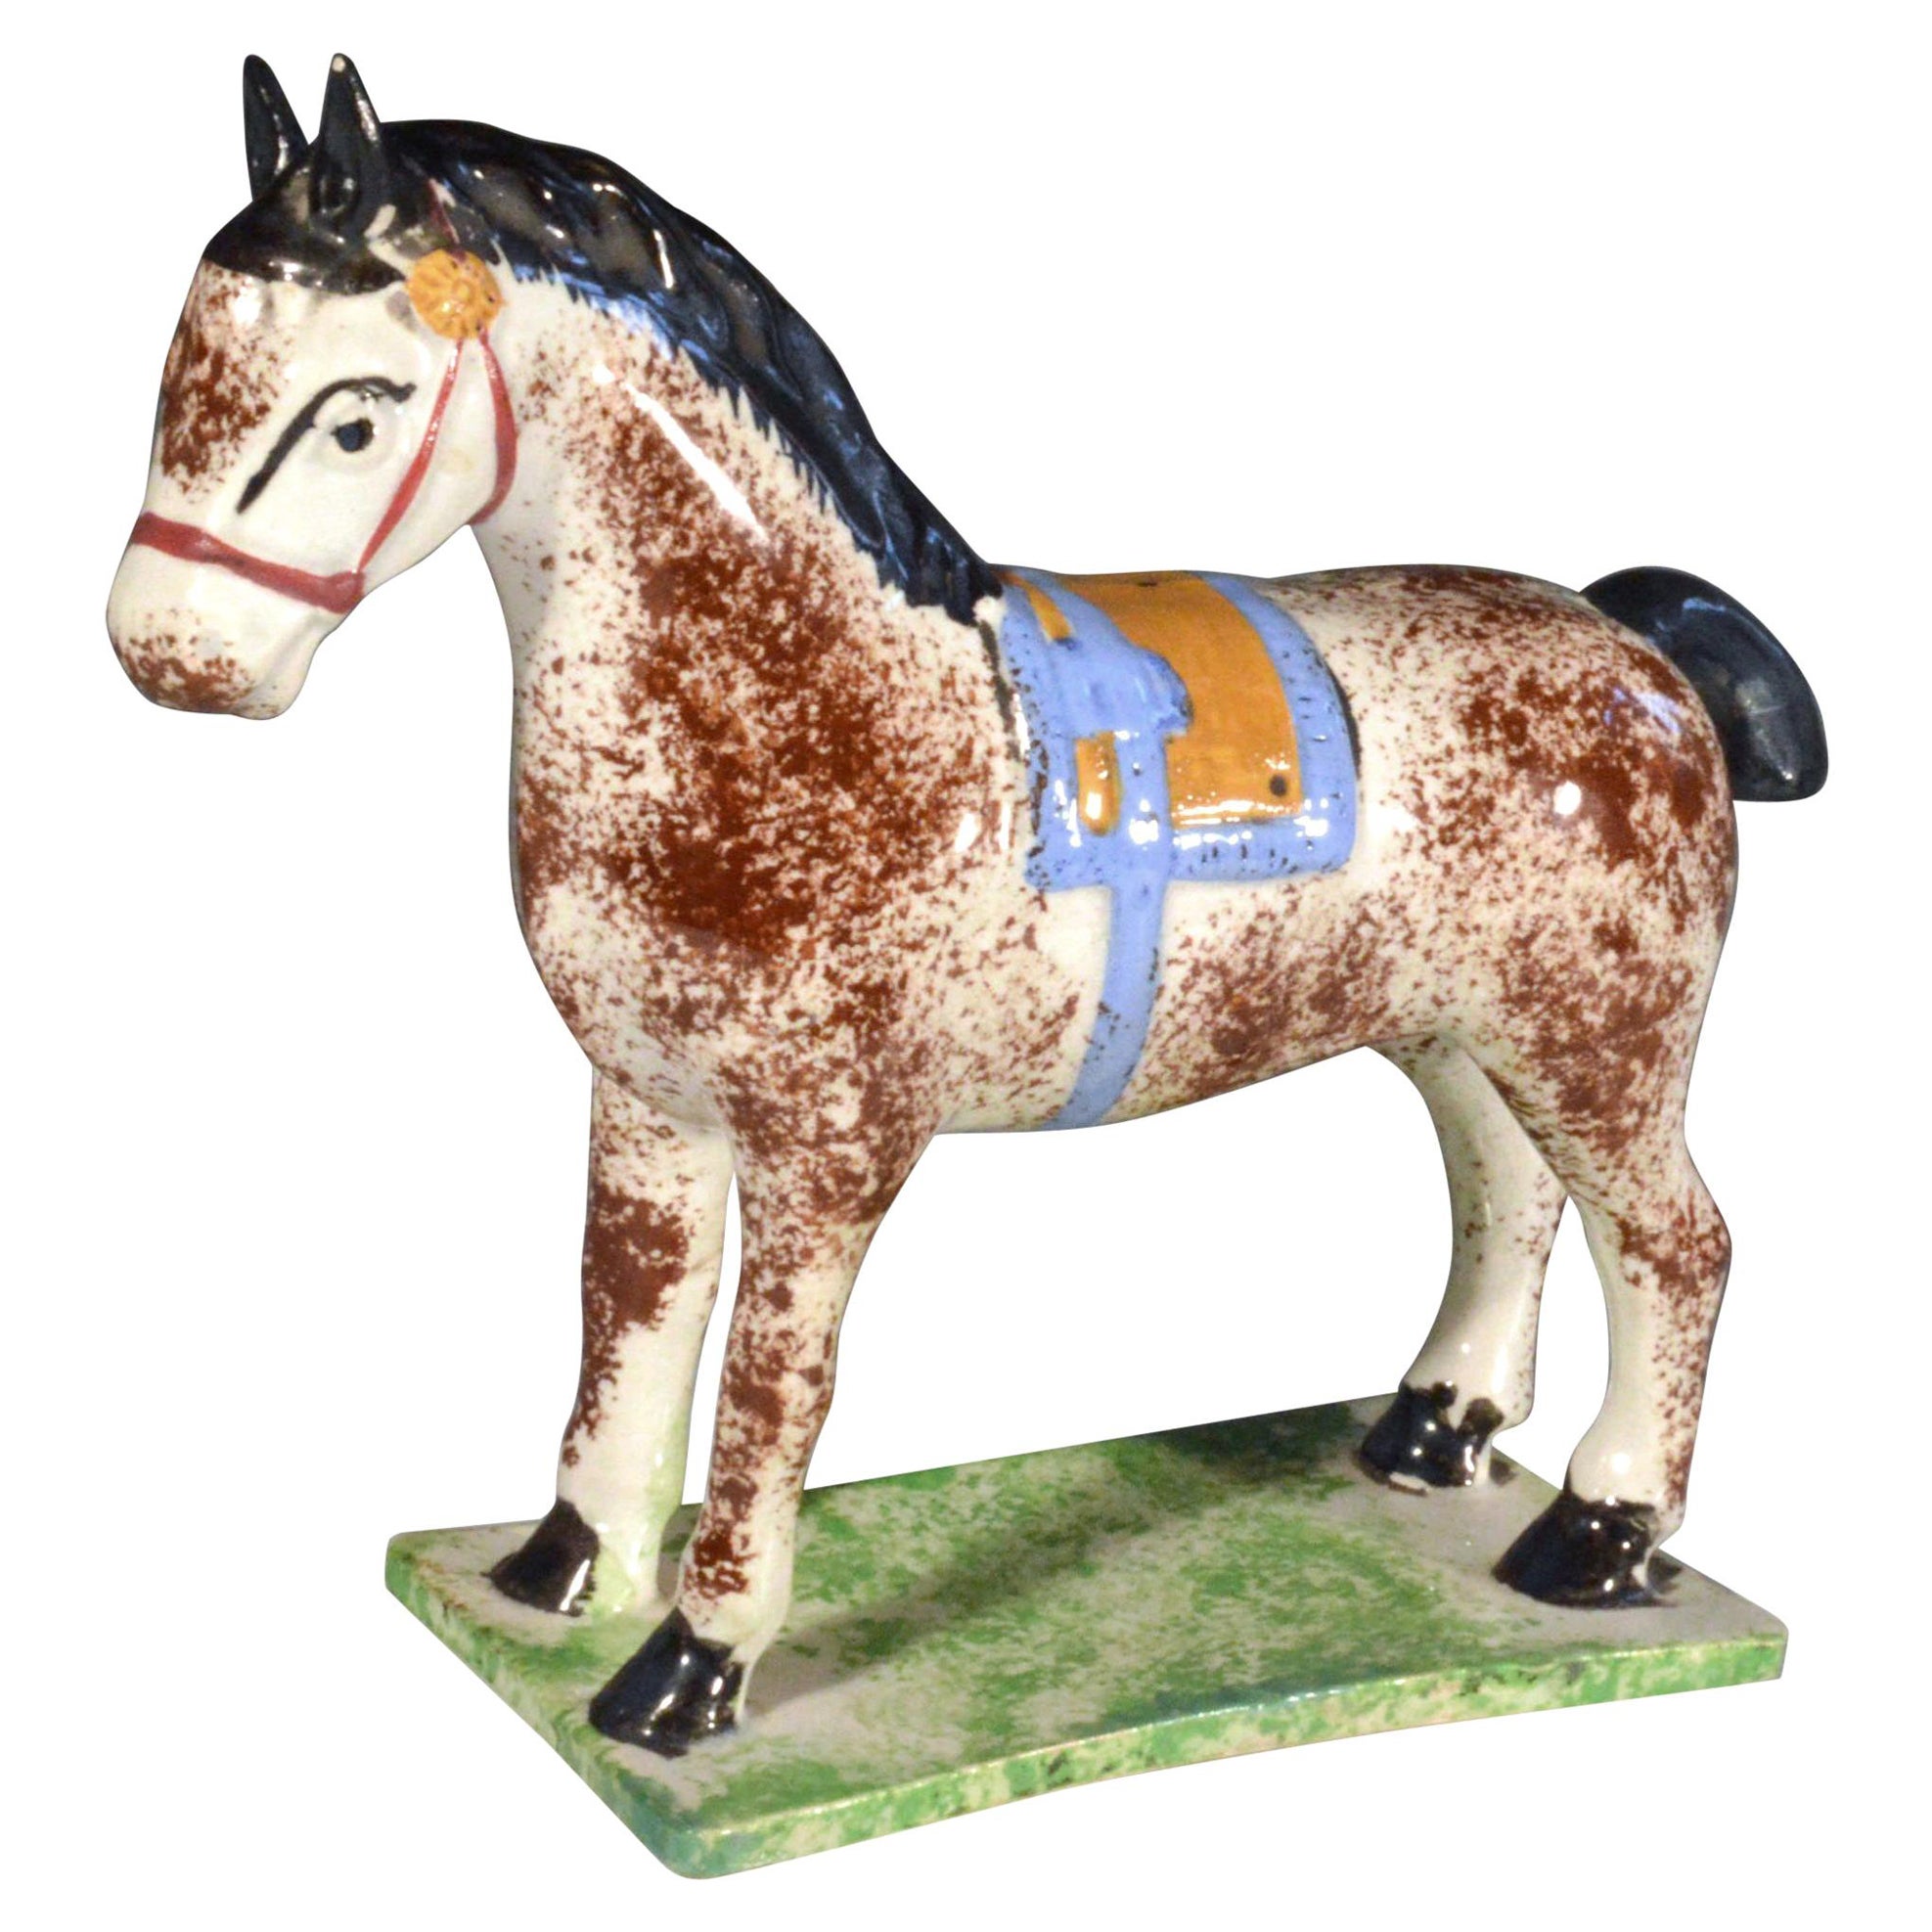 Newcastle Prattware Pottery Horse, Attributed to St. Anthony Pottery For Sale